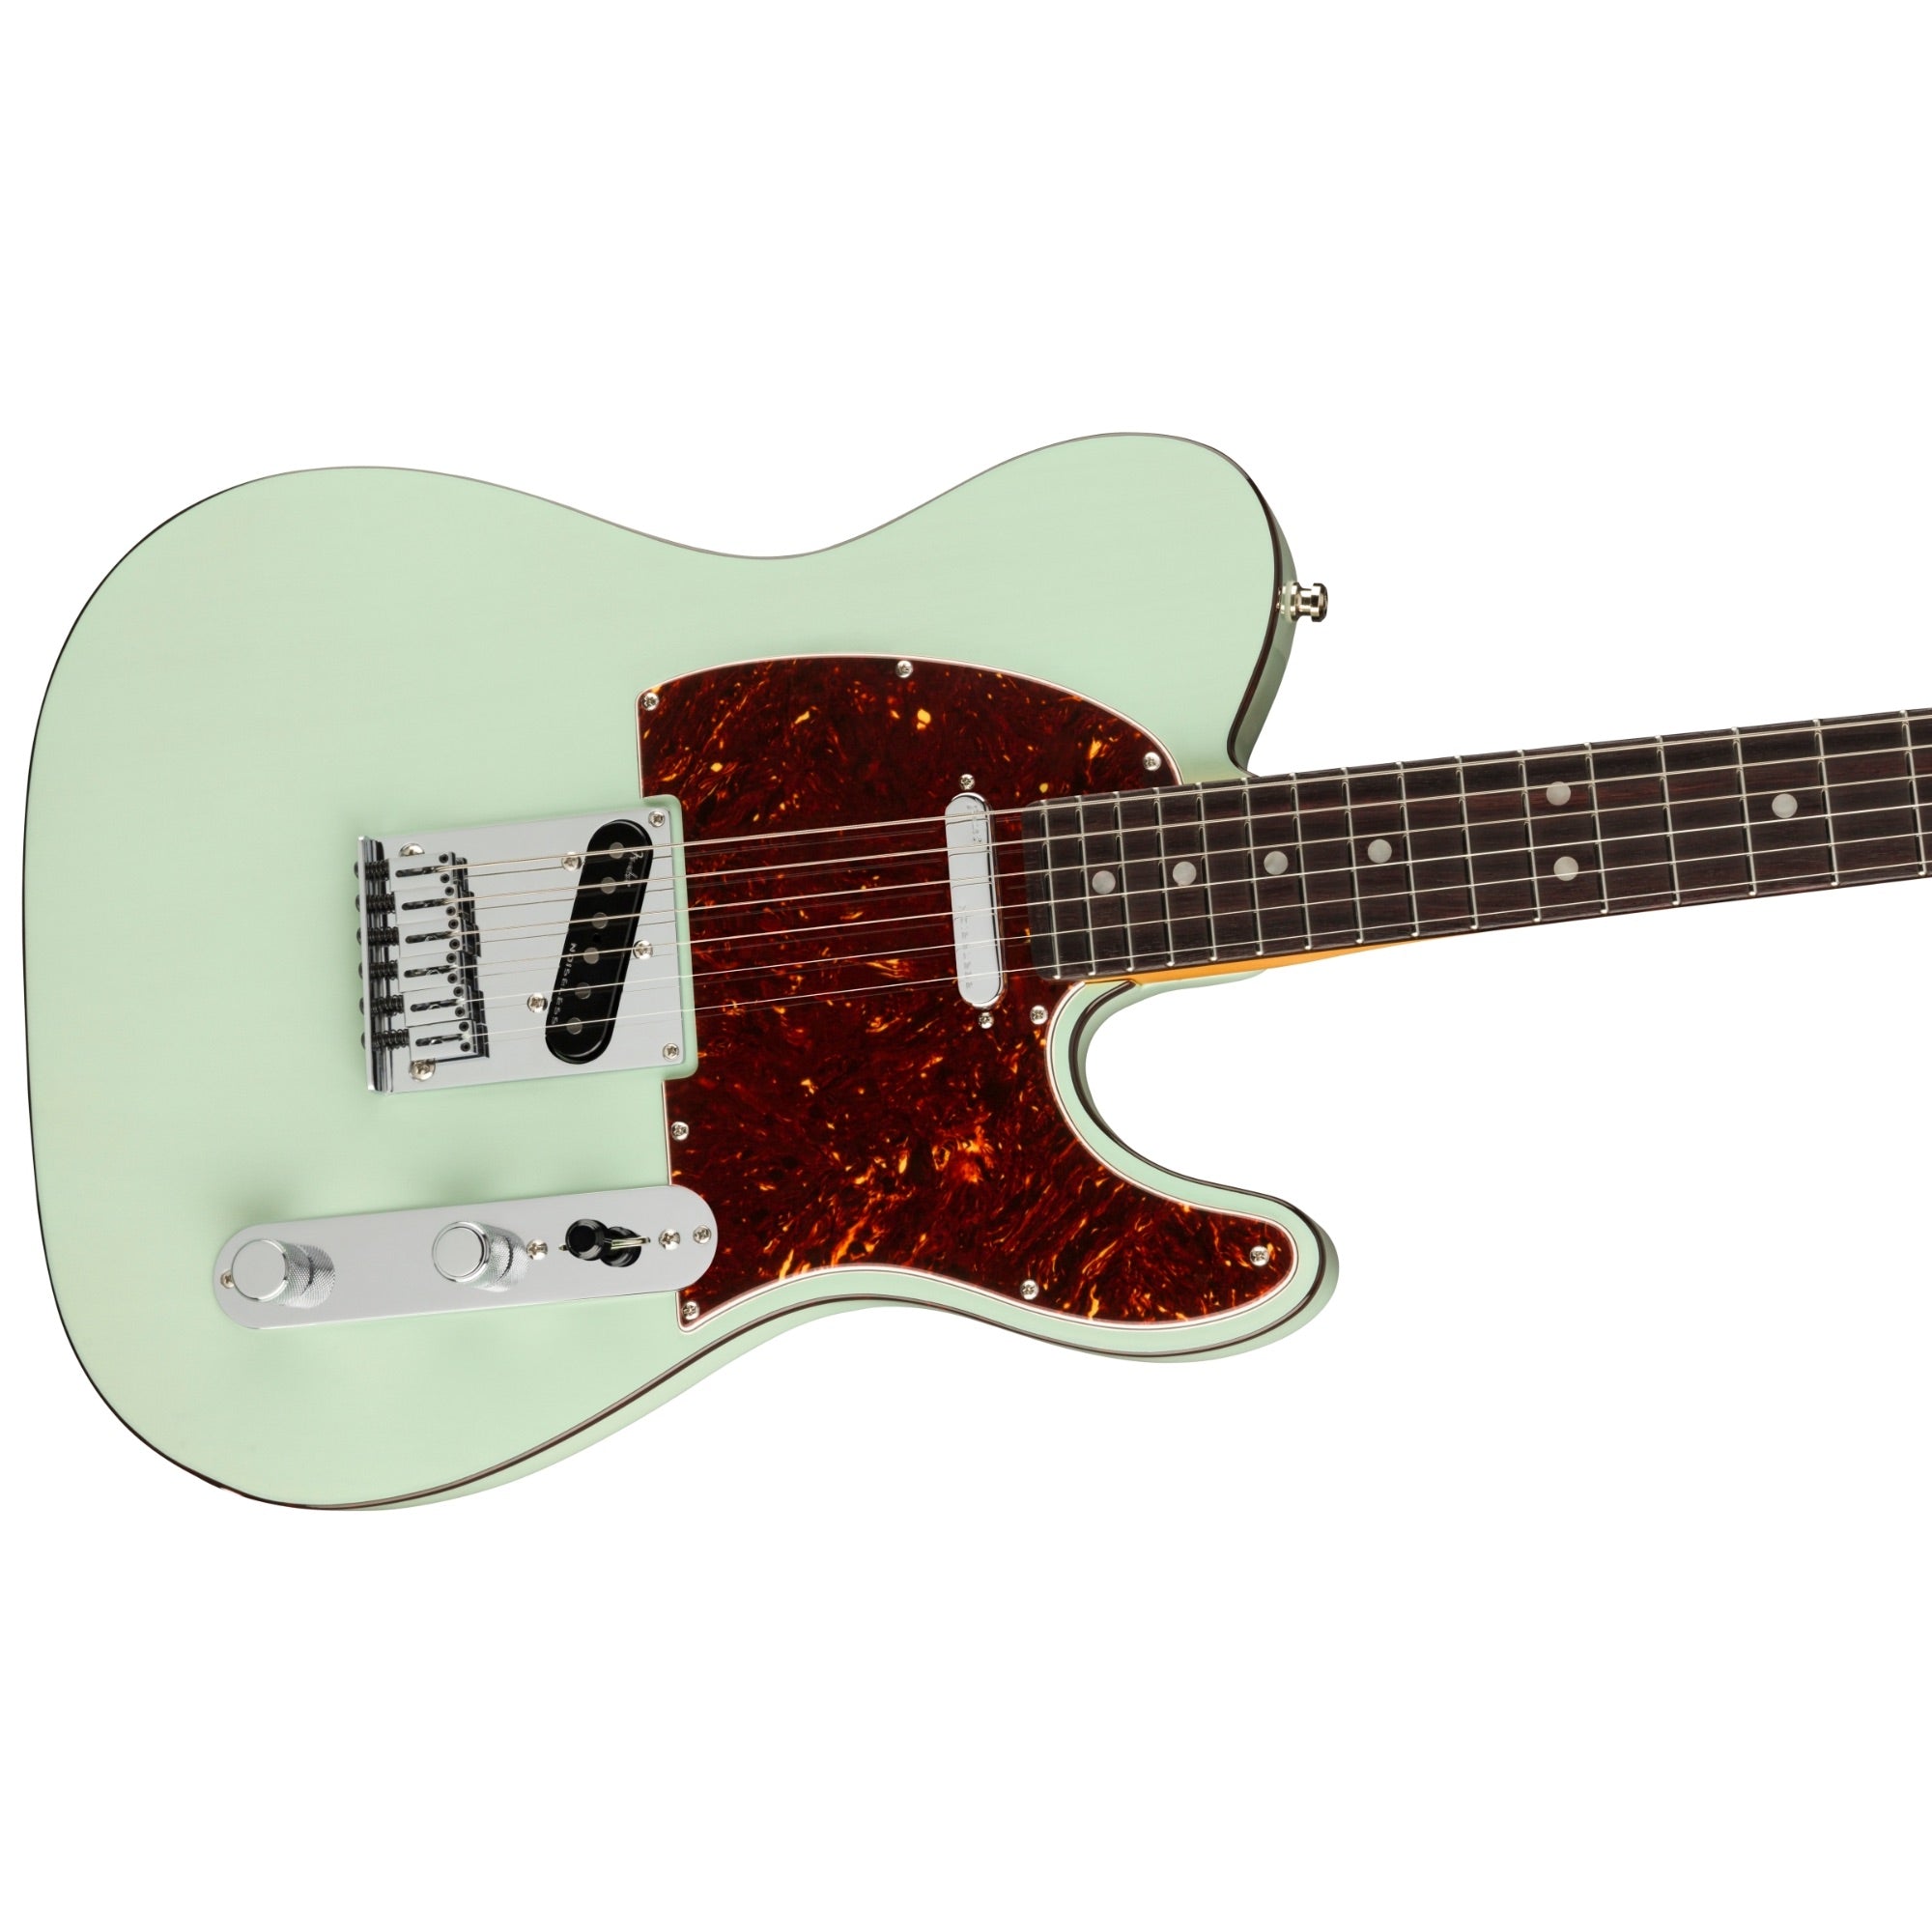 Fender American Ultra Luxe Telecaster, Transparent Surf Green